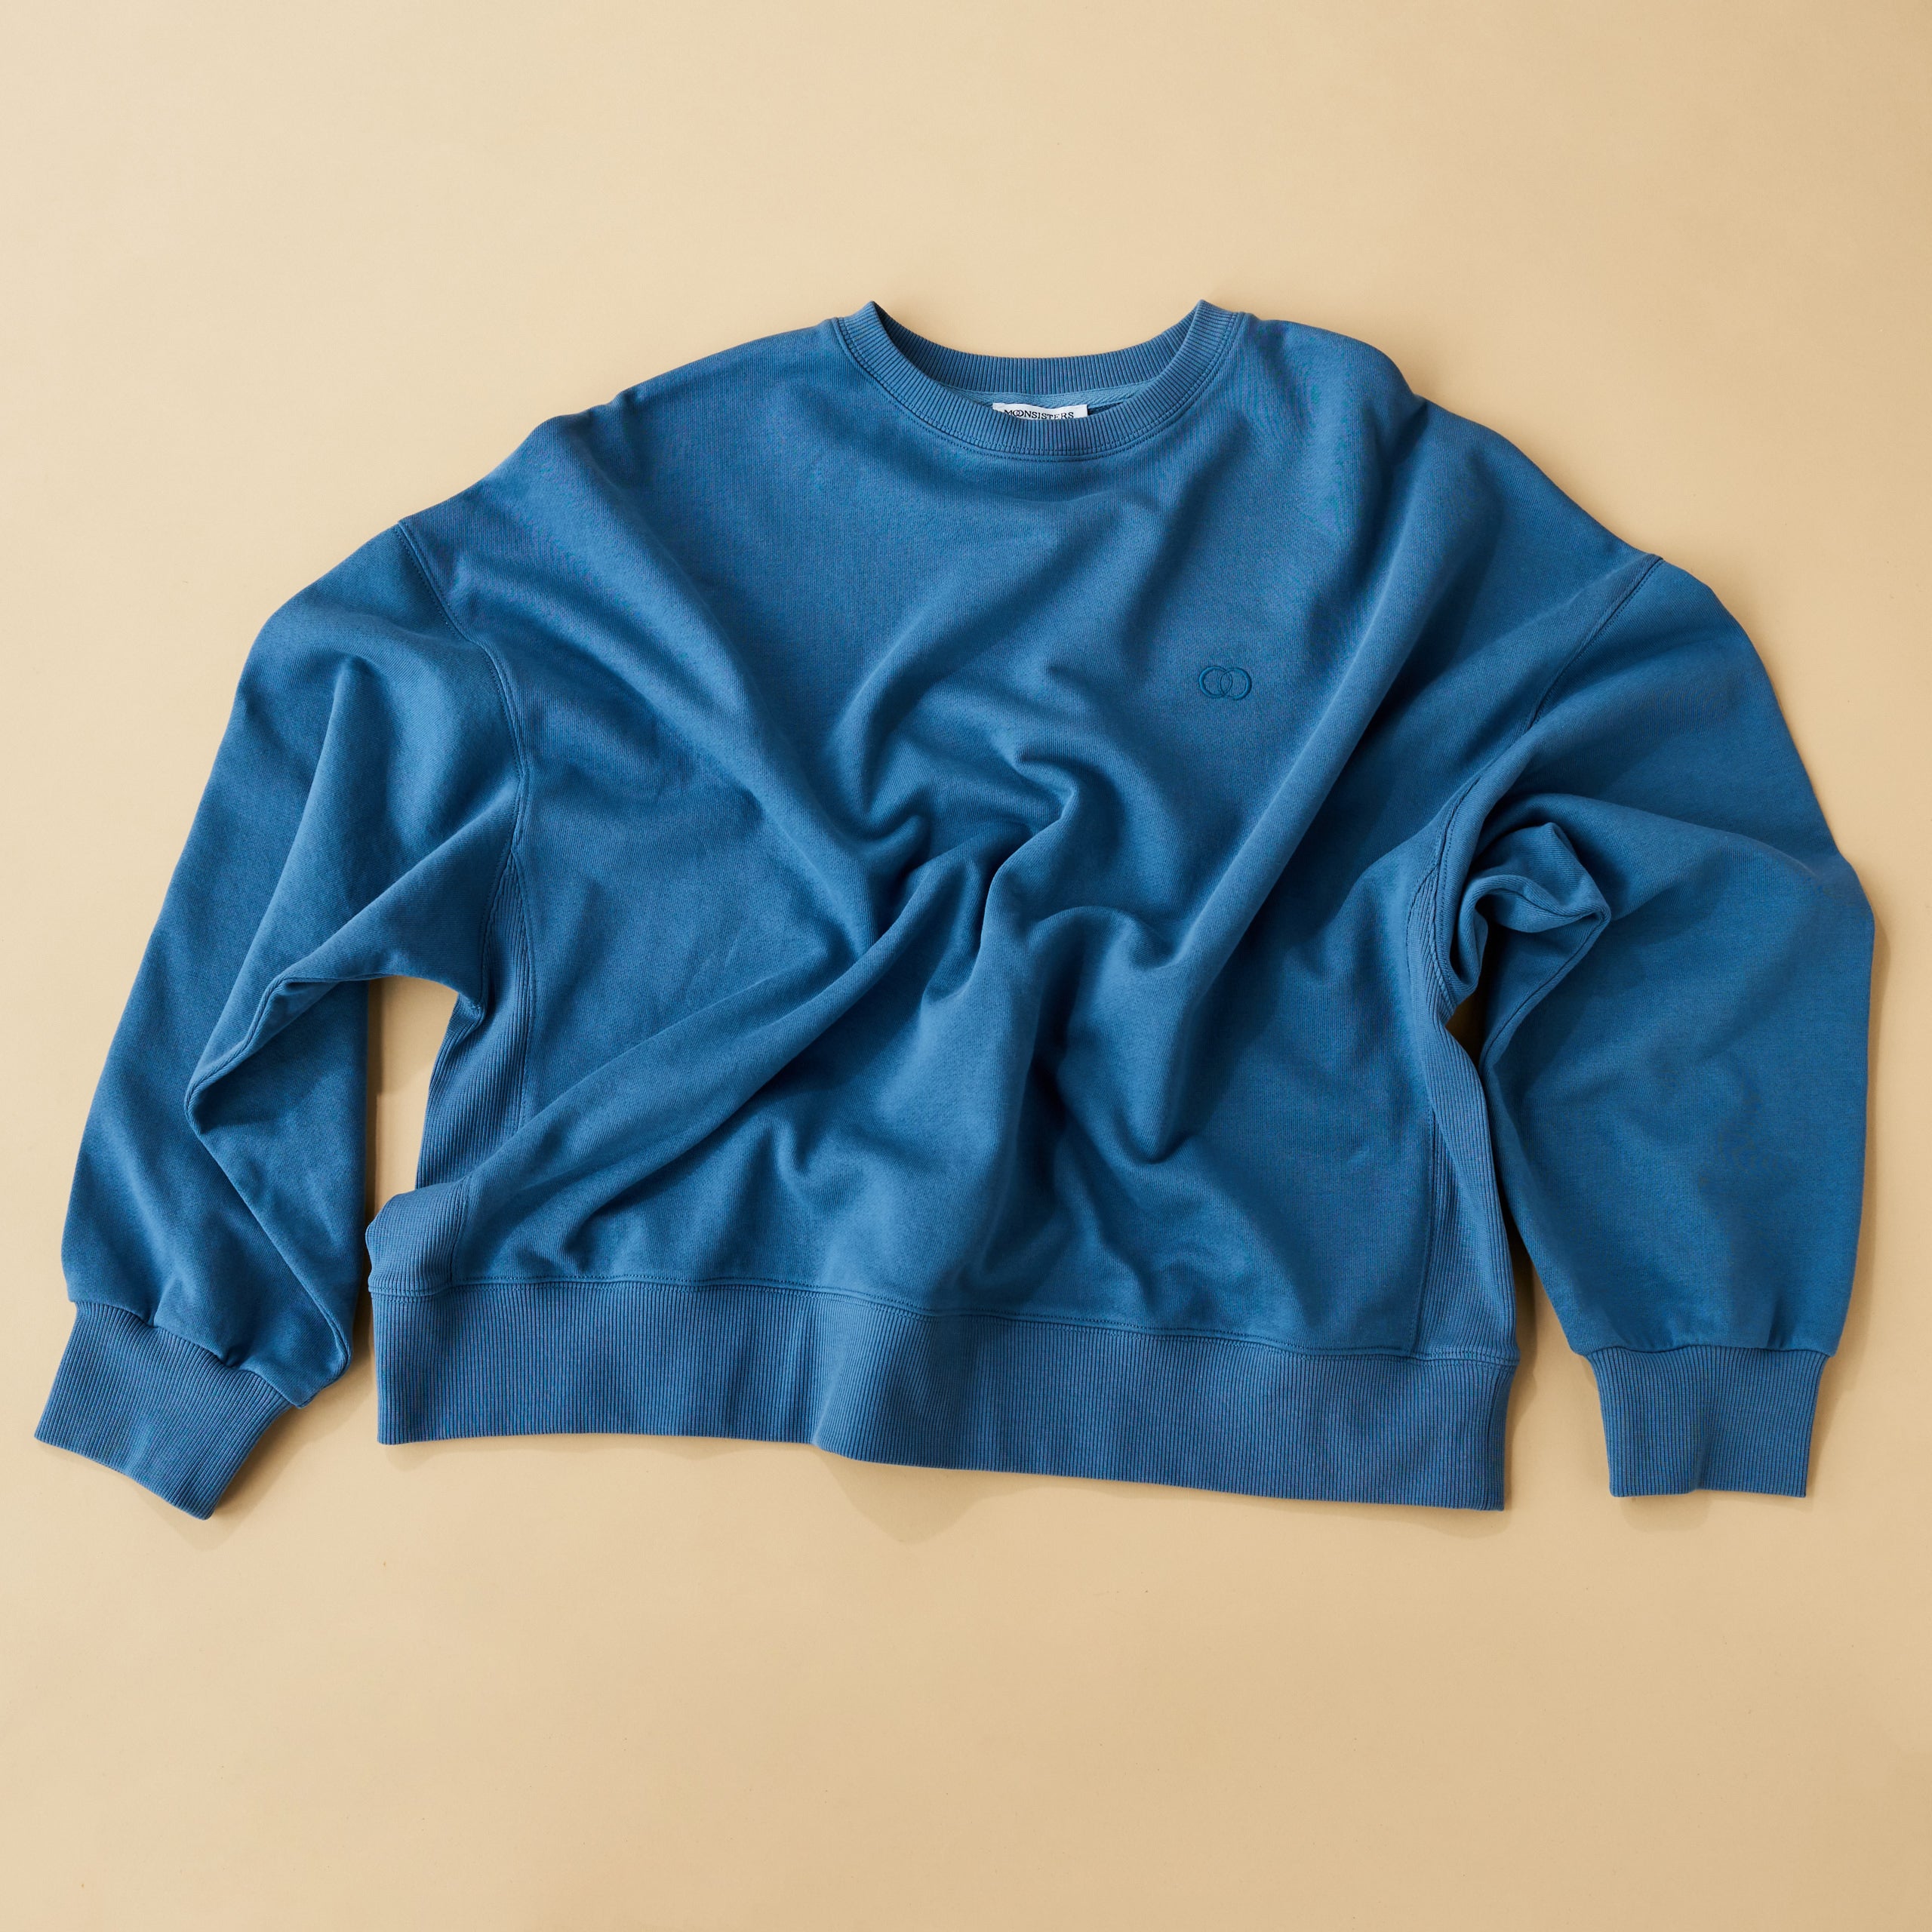 Supreme Sweater Blue Moon size m/l - Moonsisters